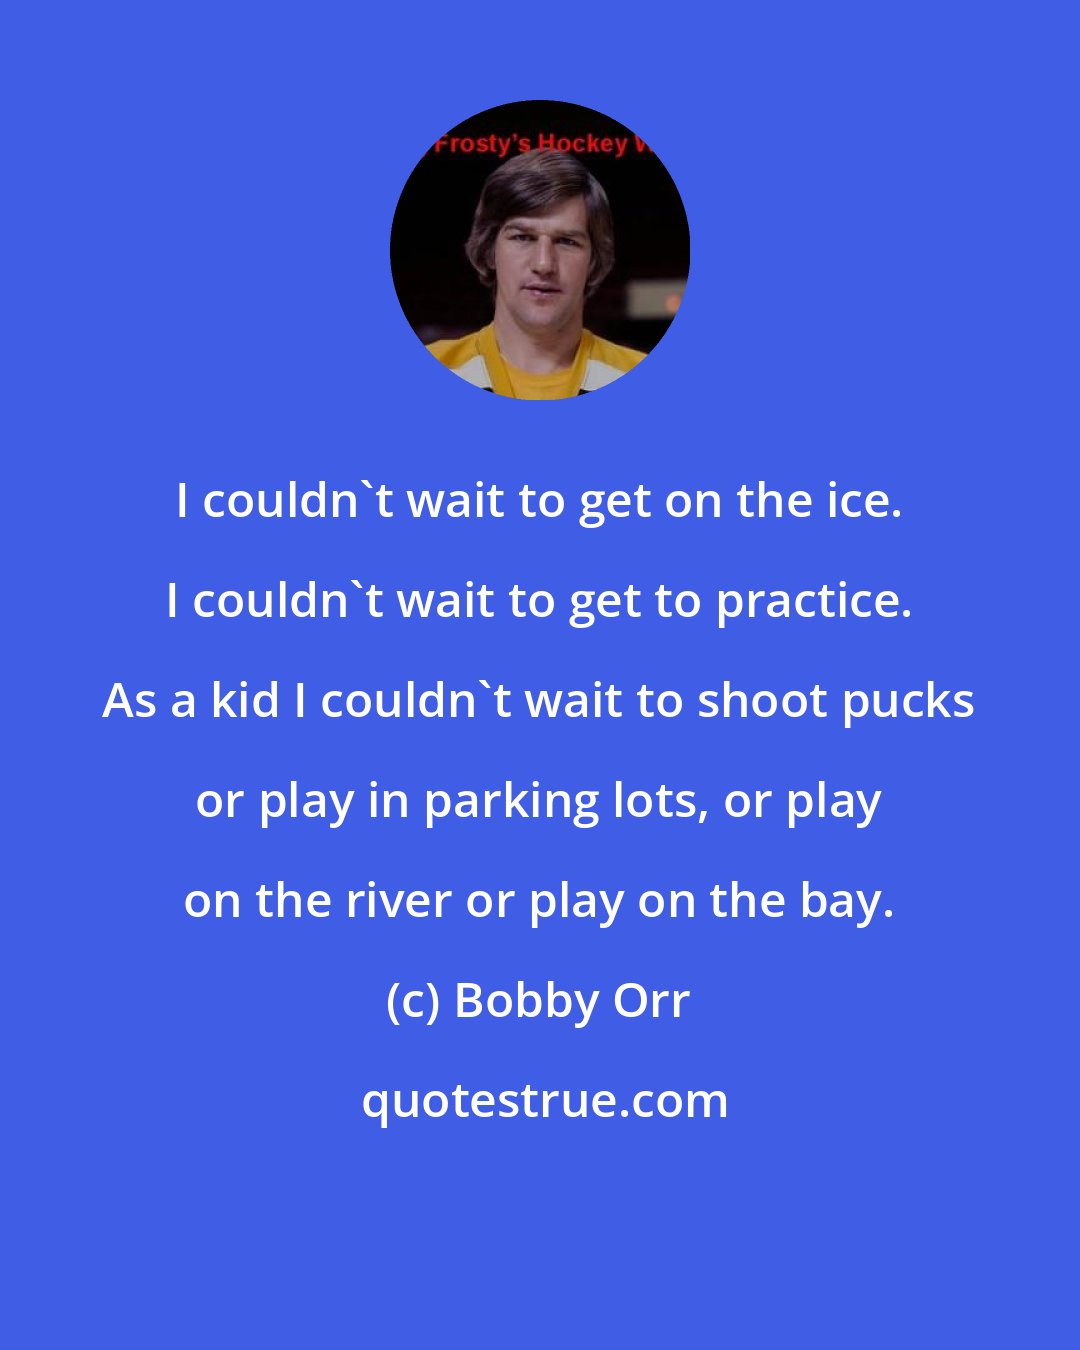 Bobby Orr: I couldn't wait to get on the ice. I couldn't wait to get to practice. As a kid I couldn't wait to shoot pucks or play in parking lots, or play on the river or play on the bay.